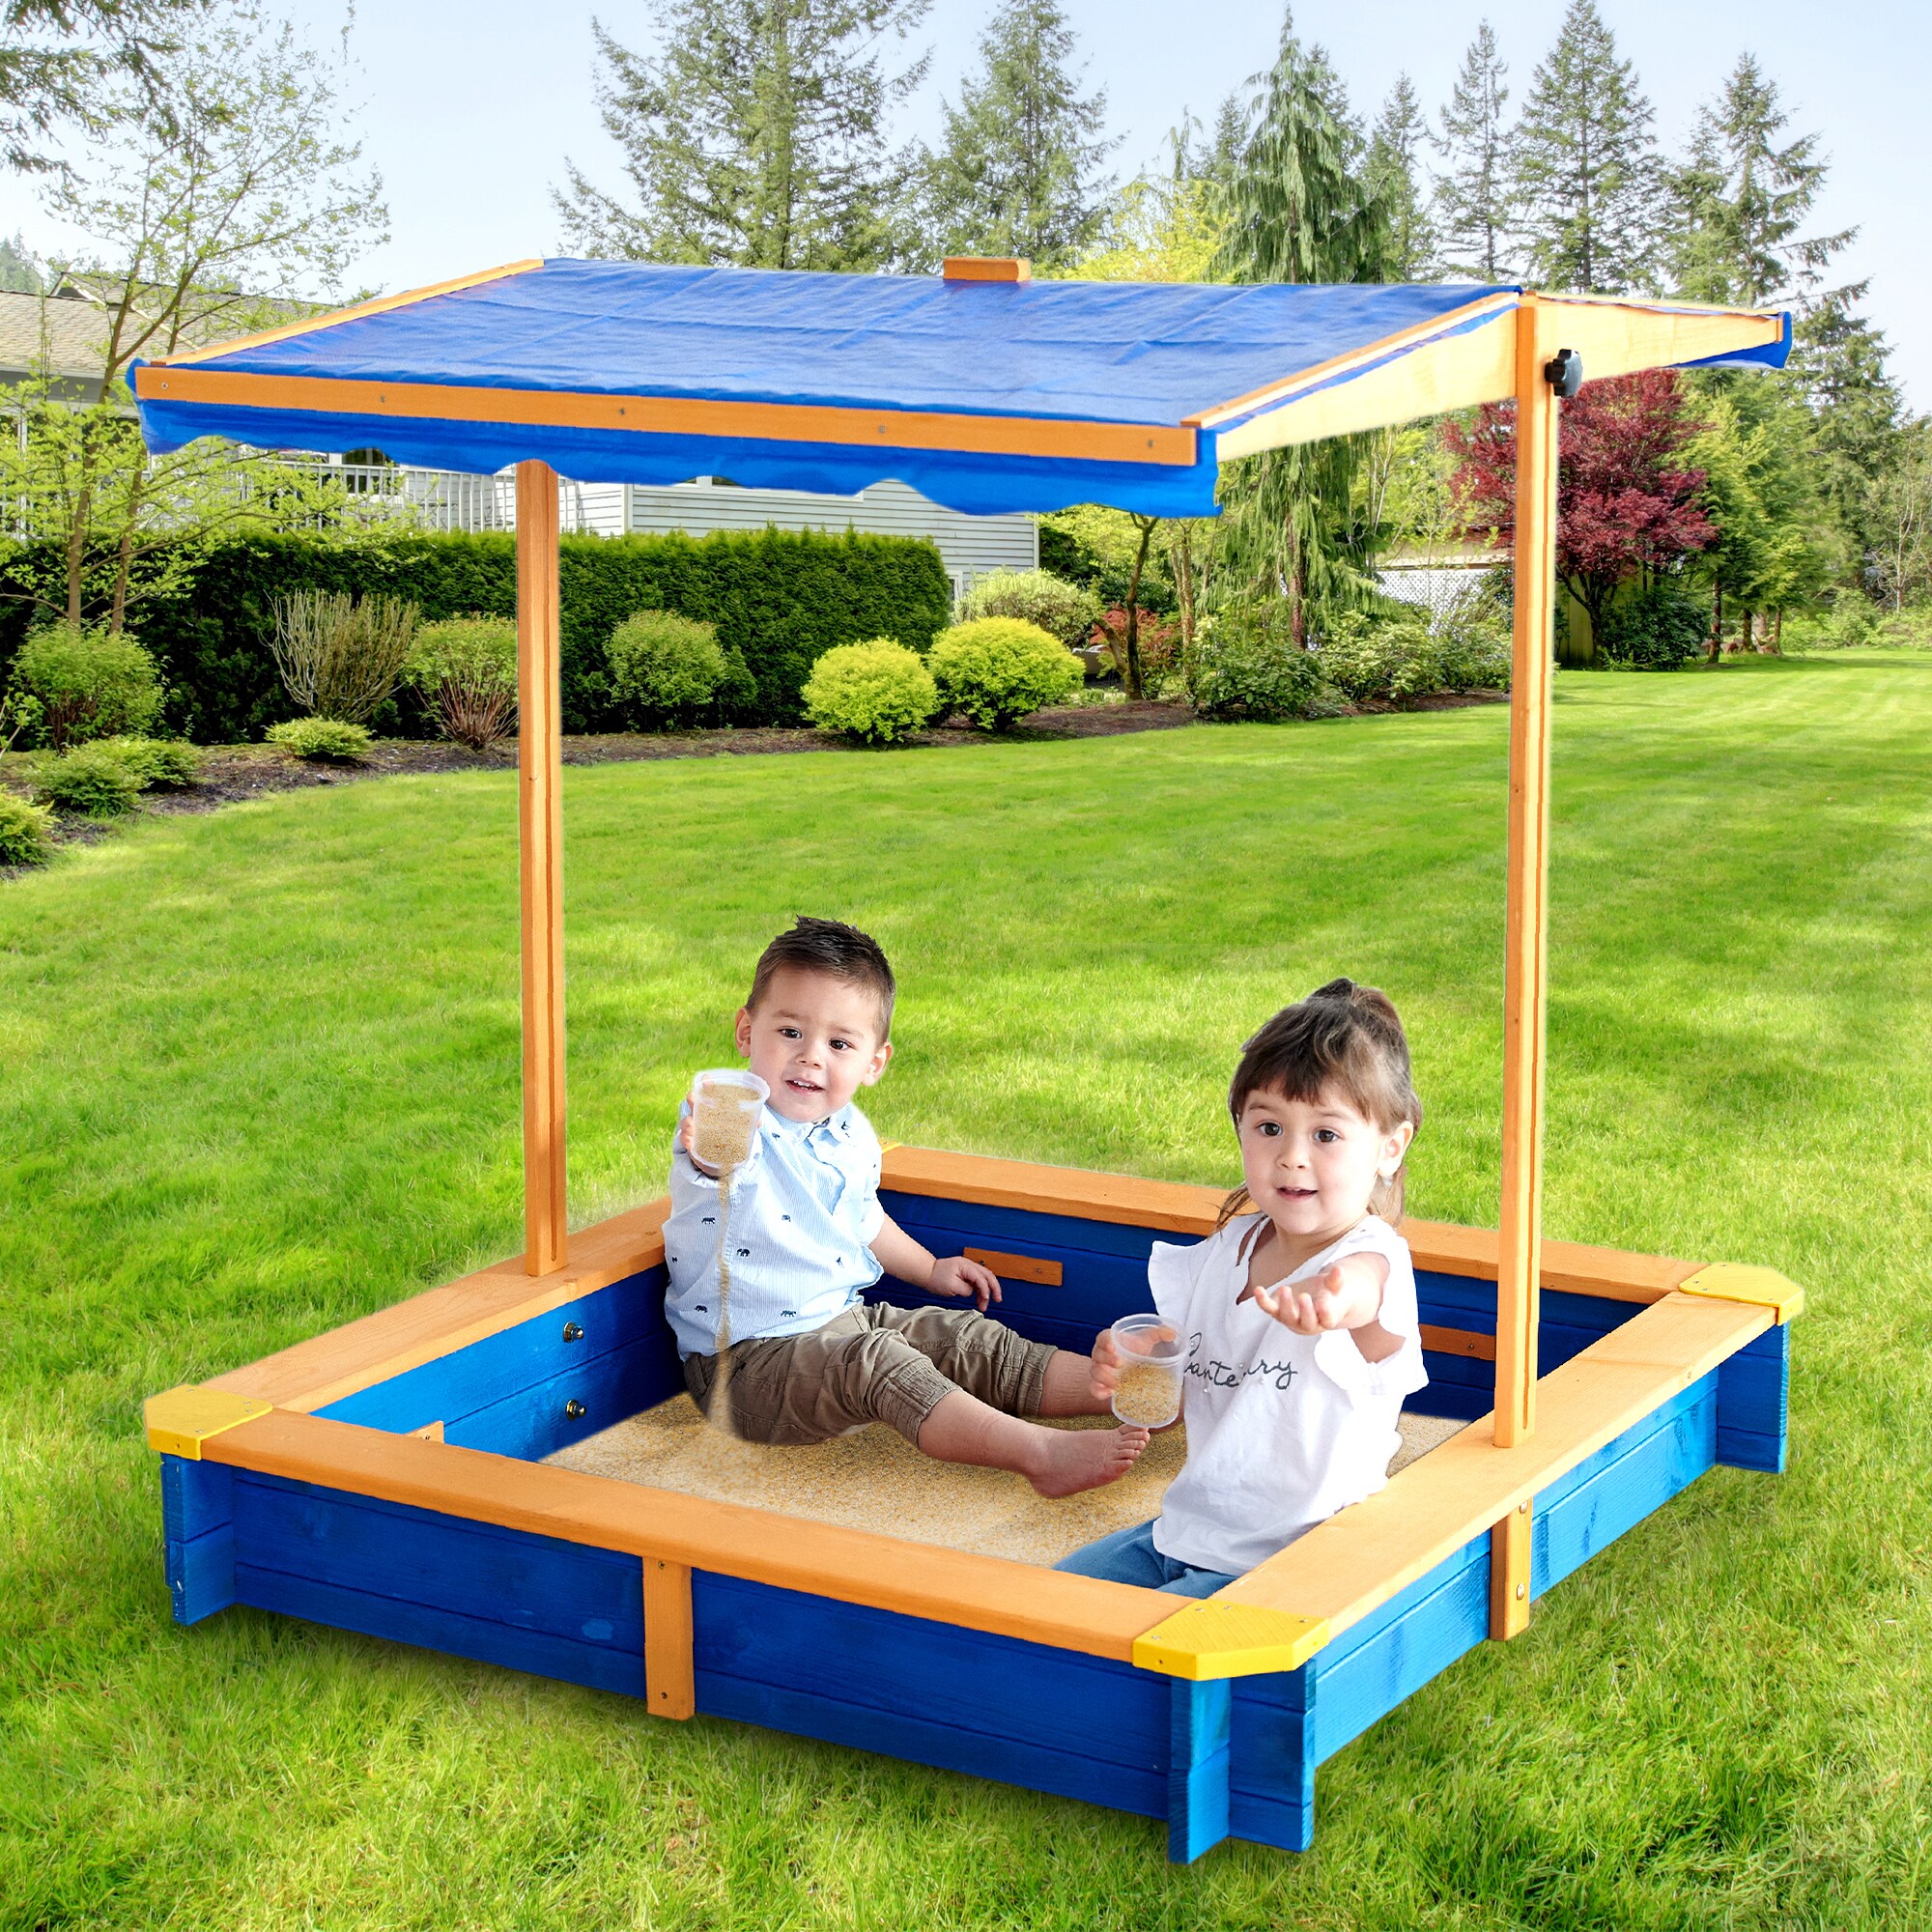 Teamson Kids Outdoor Summer Sandbox with Canopy Natural/Blue 